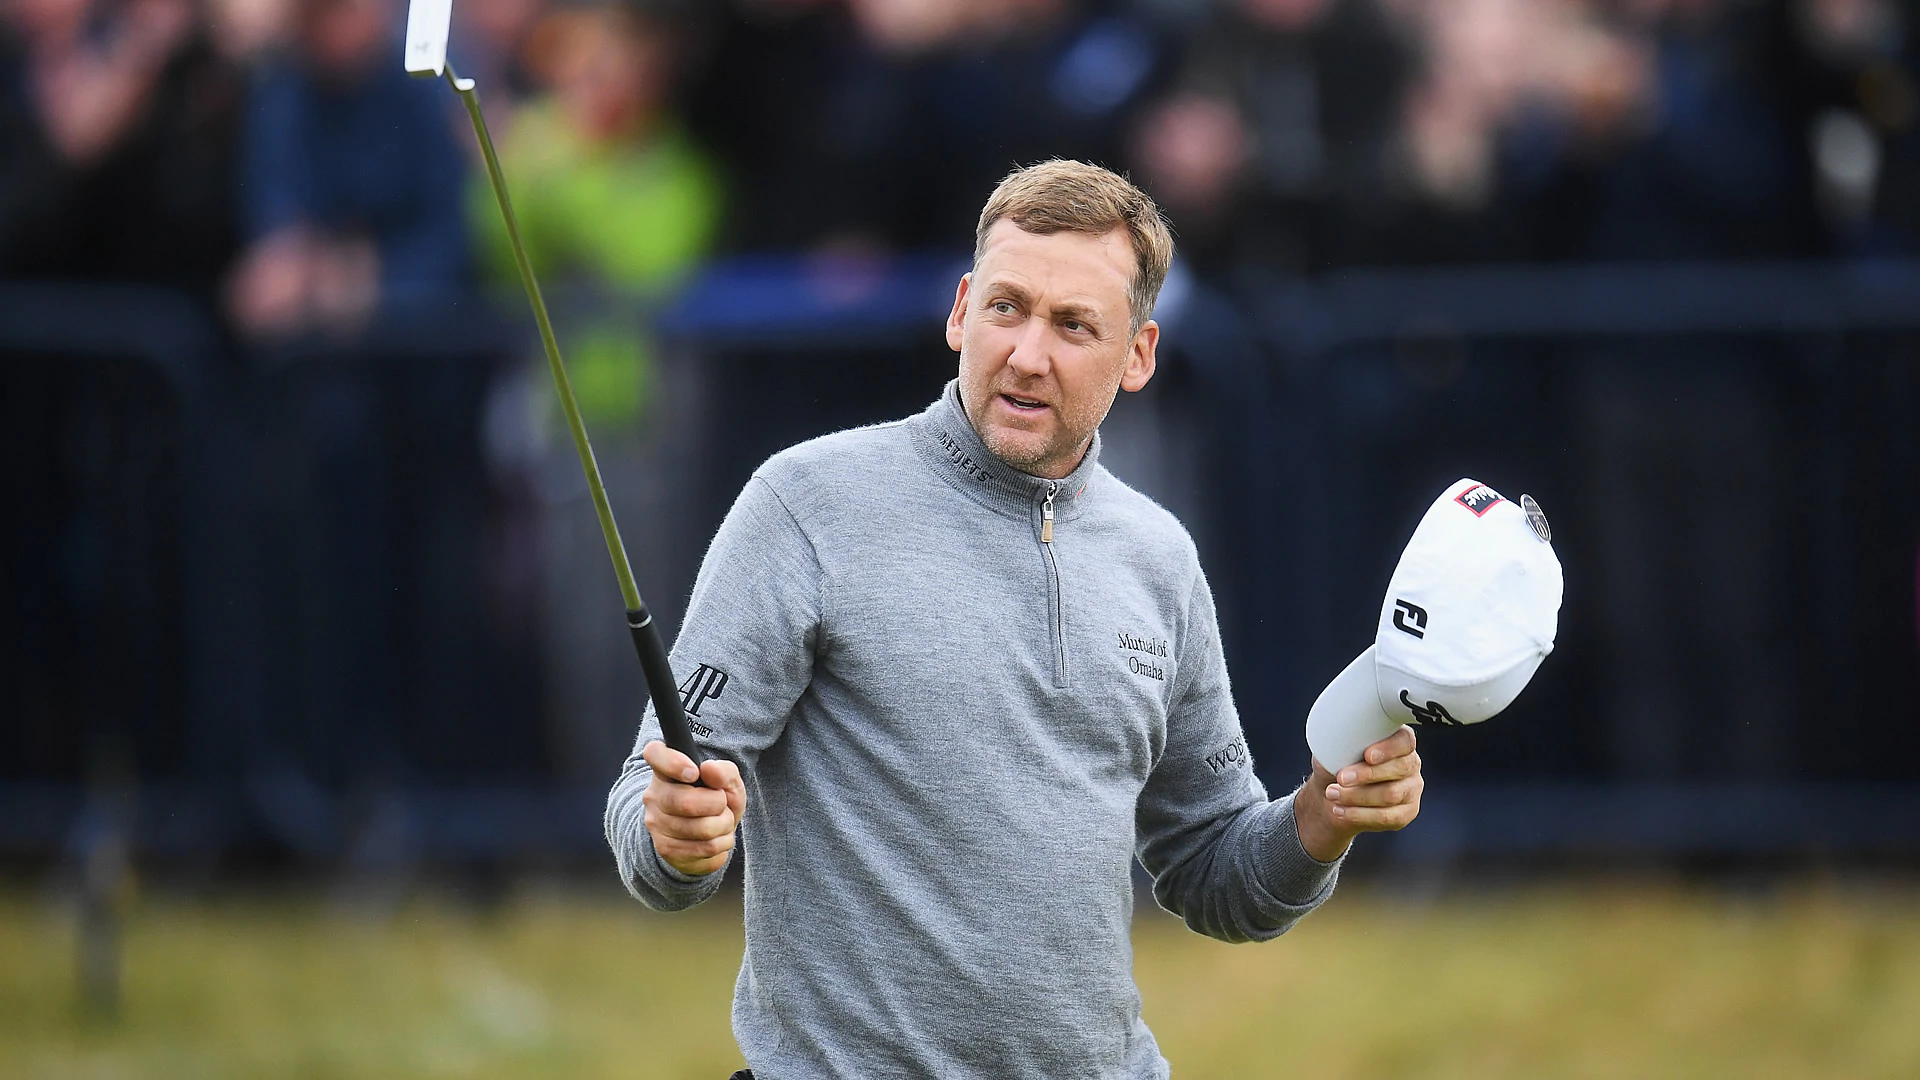 Poulter ready to go 'toe-to-toe with anyone this weekend' 6